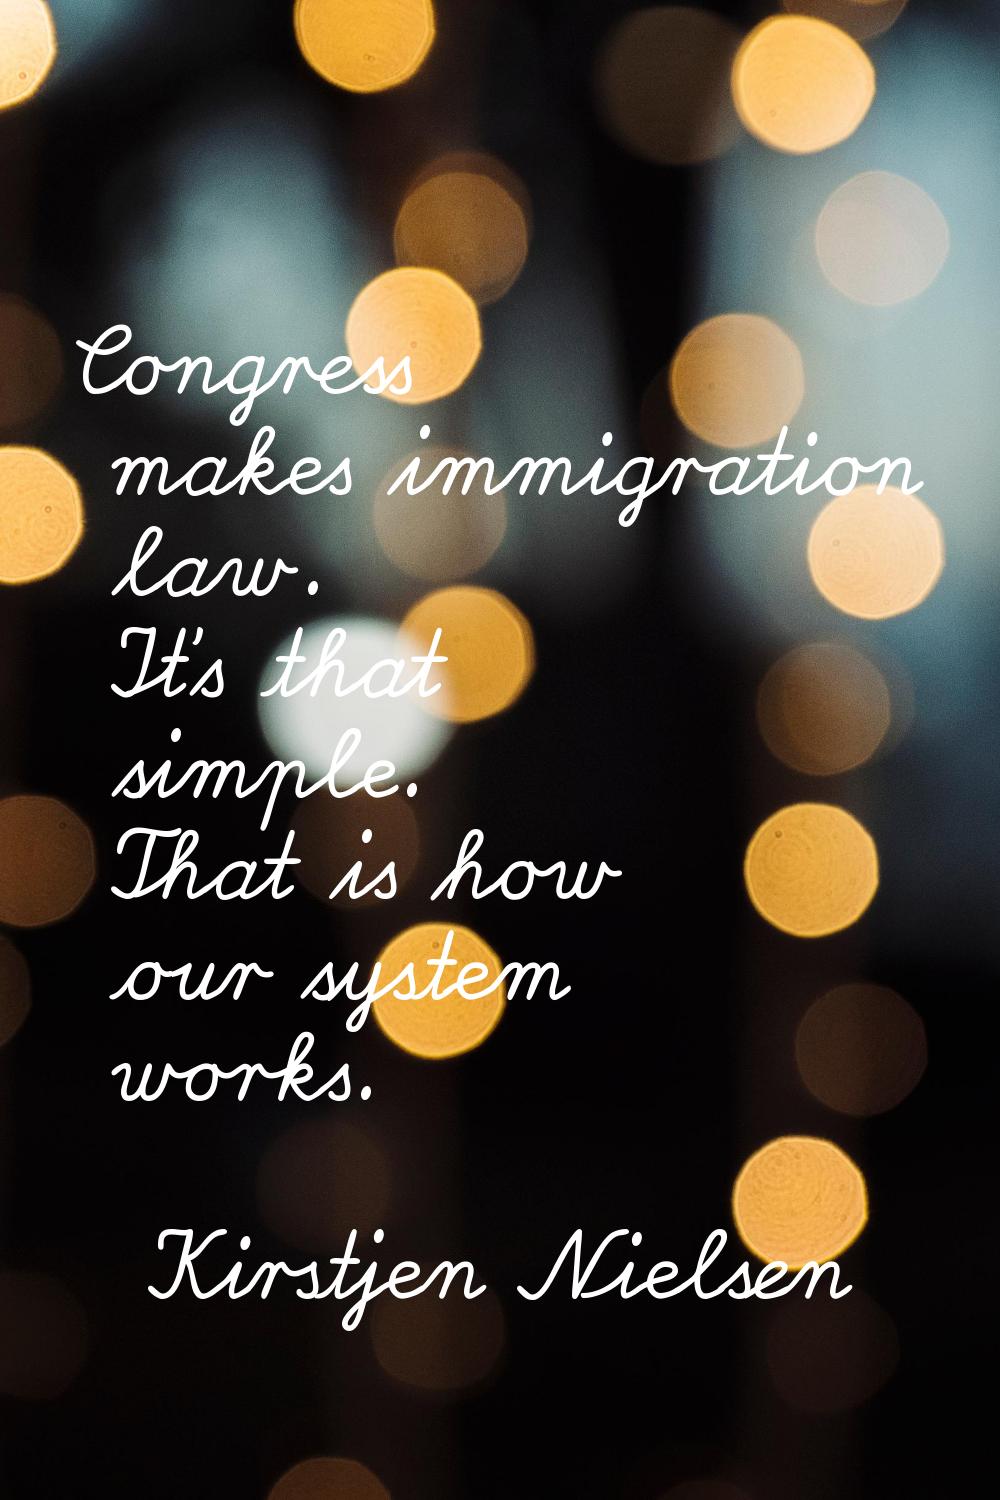 Congress makes immigration law. It's that simple. That is how our system works.